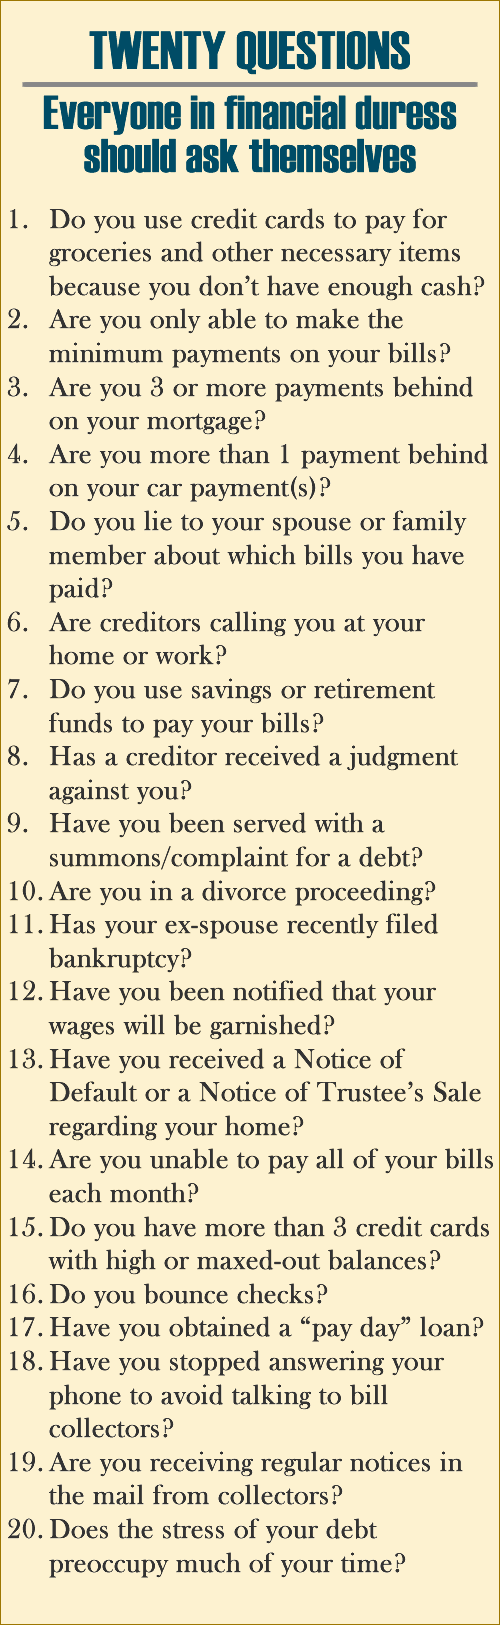 20 Questions You Should Ask Yourself If You Are Having Financial Difficulties.